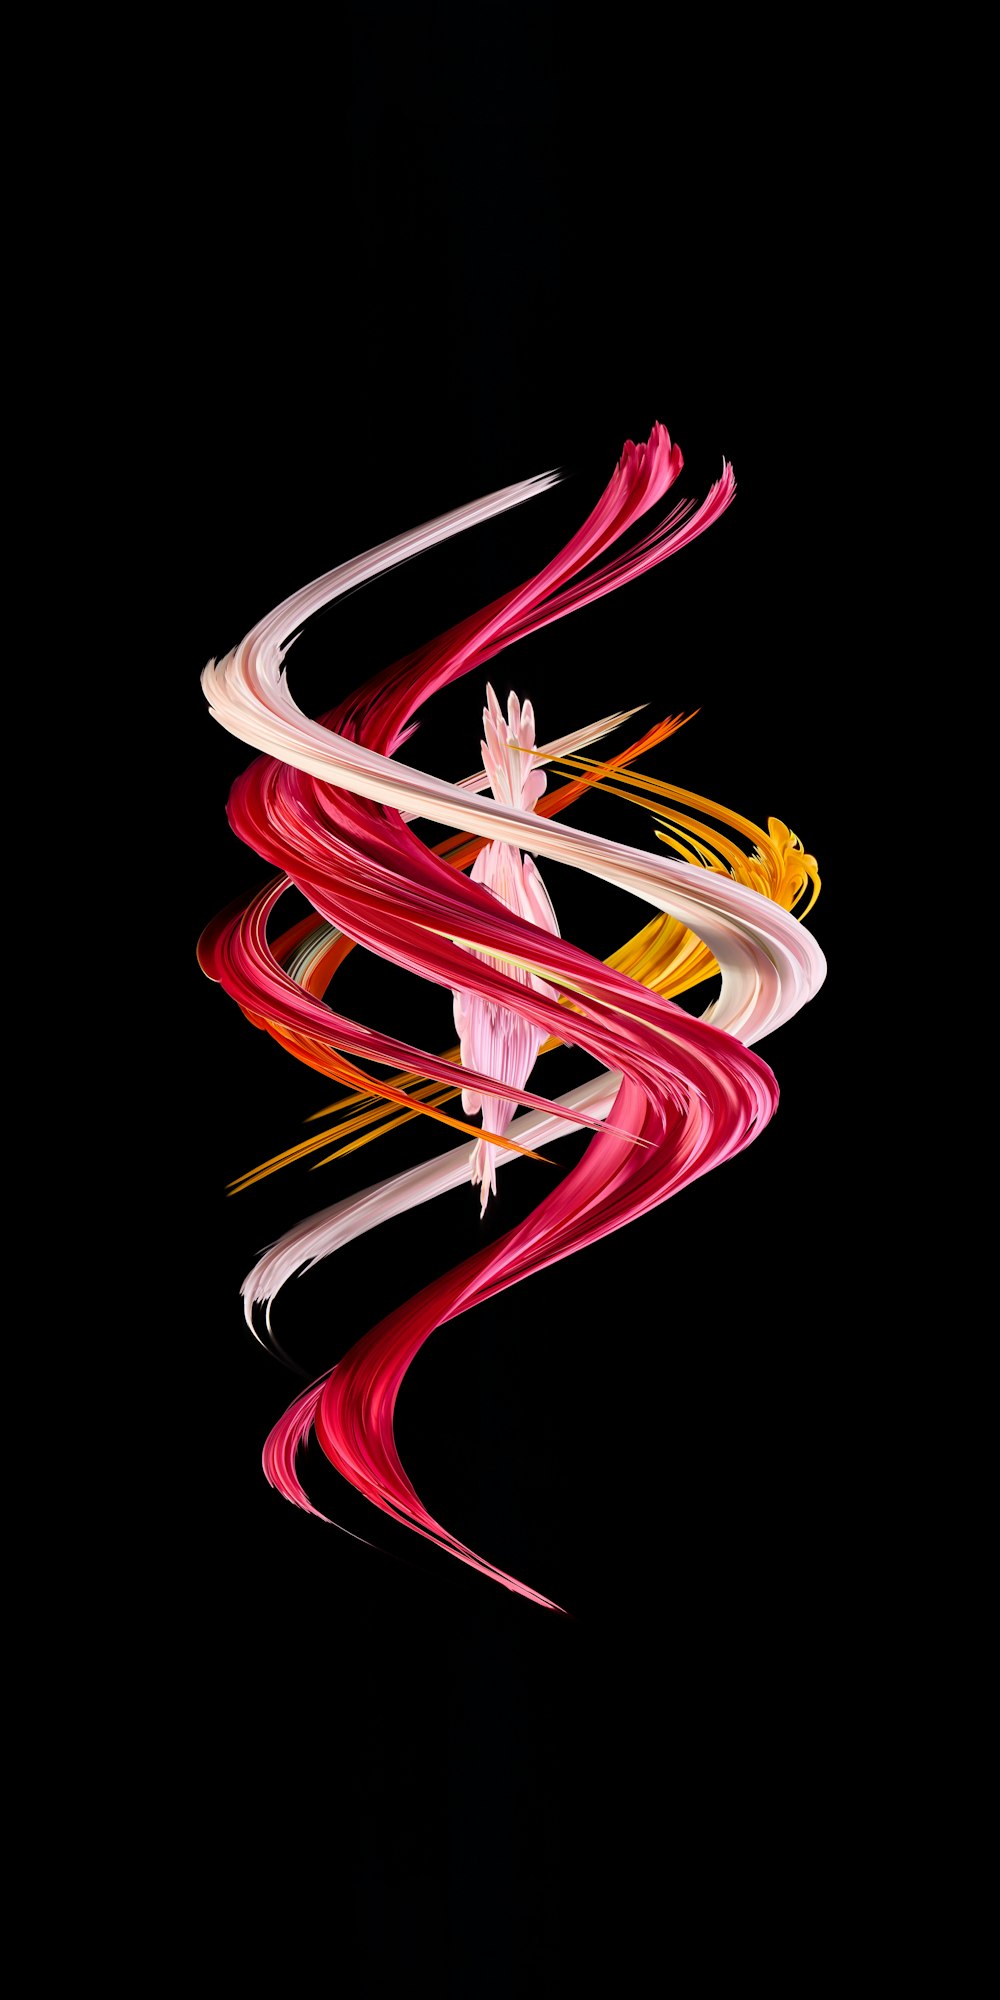 a long exposure of a flower on a black background